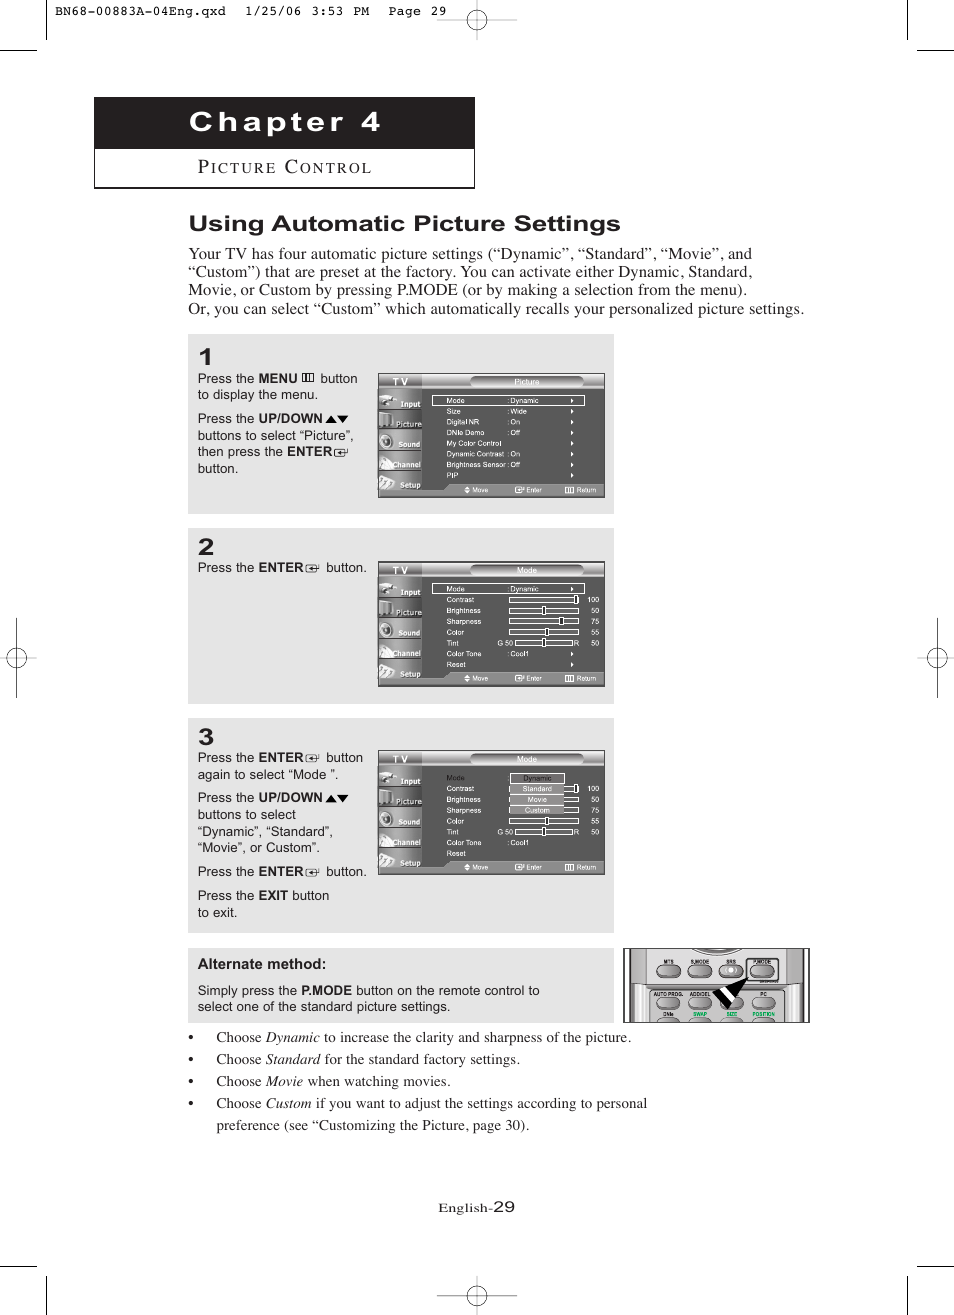 Chapter 4: picture control, Using automatic picture settings | Samsung